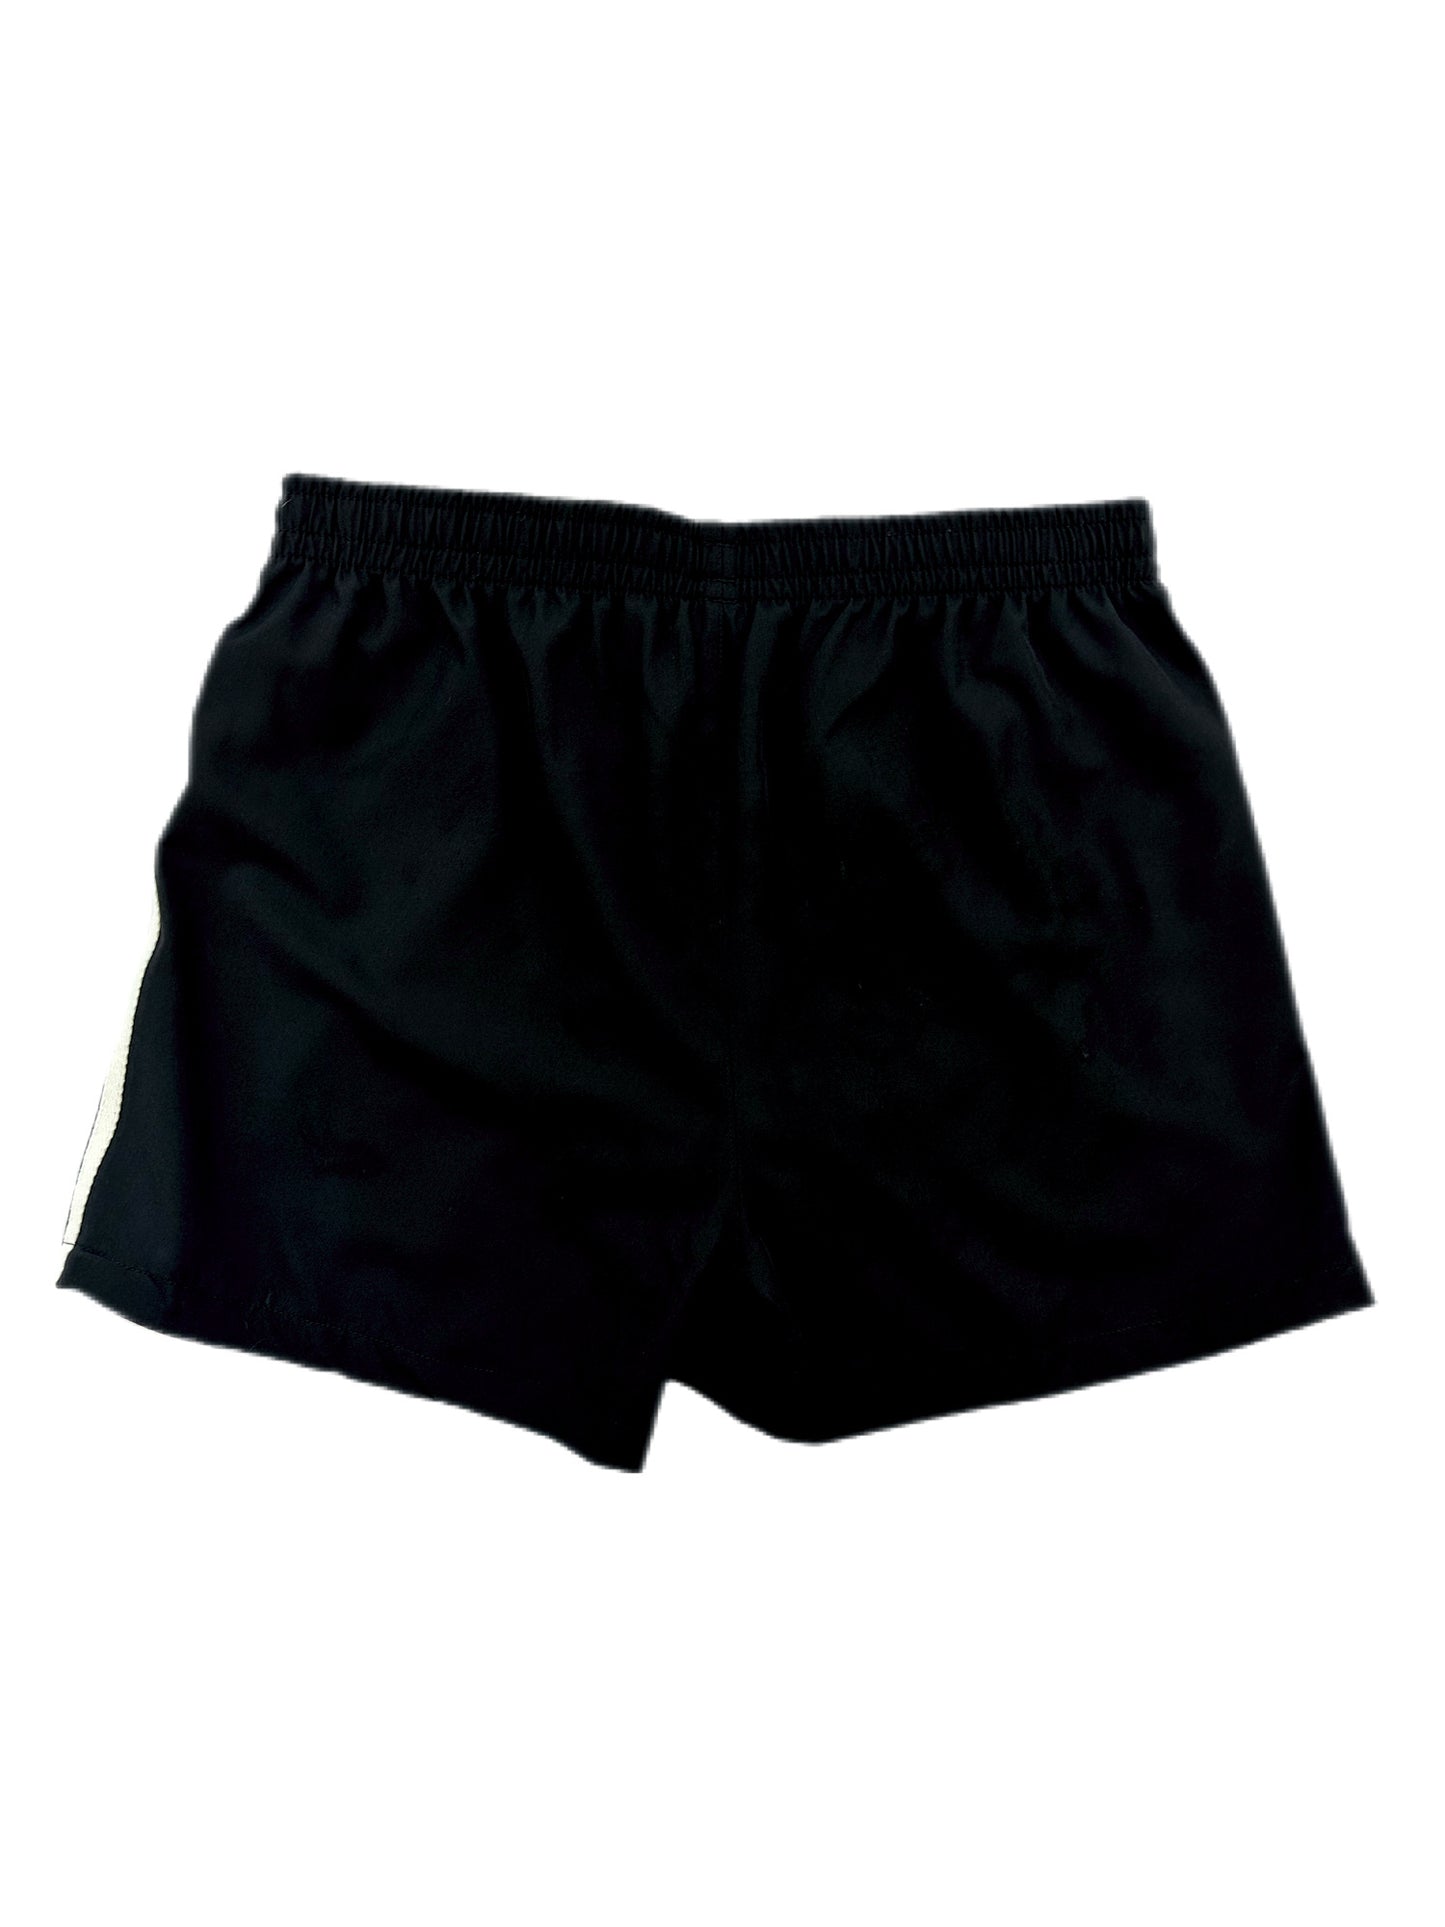 'College' Shorts